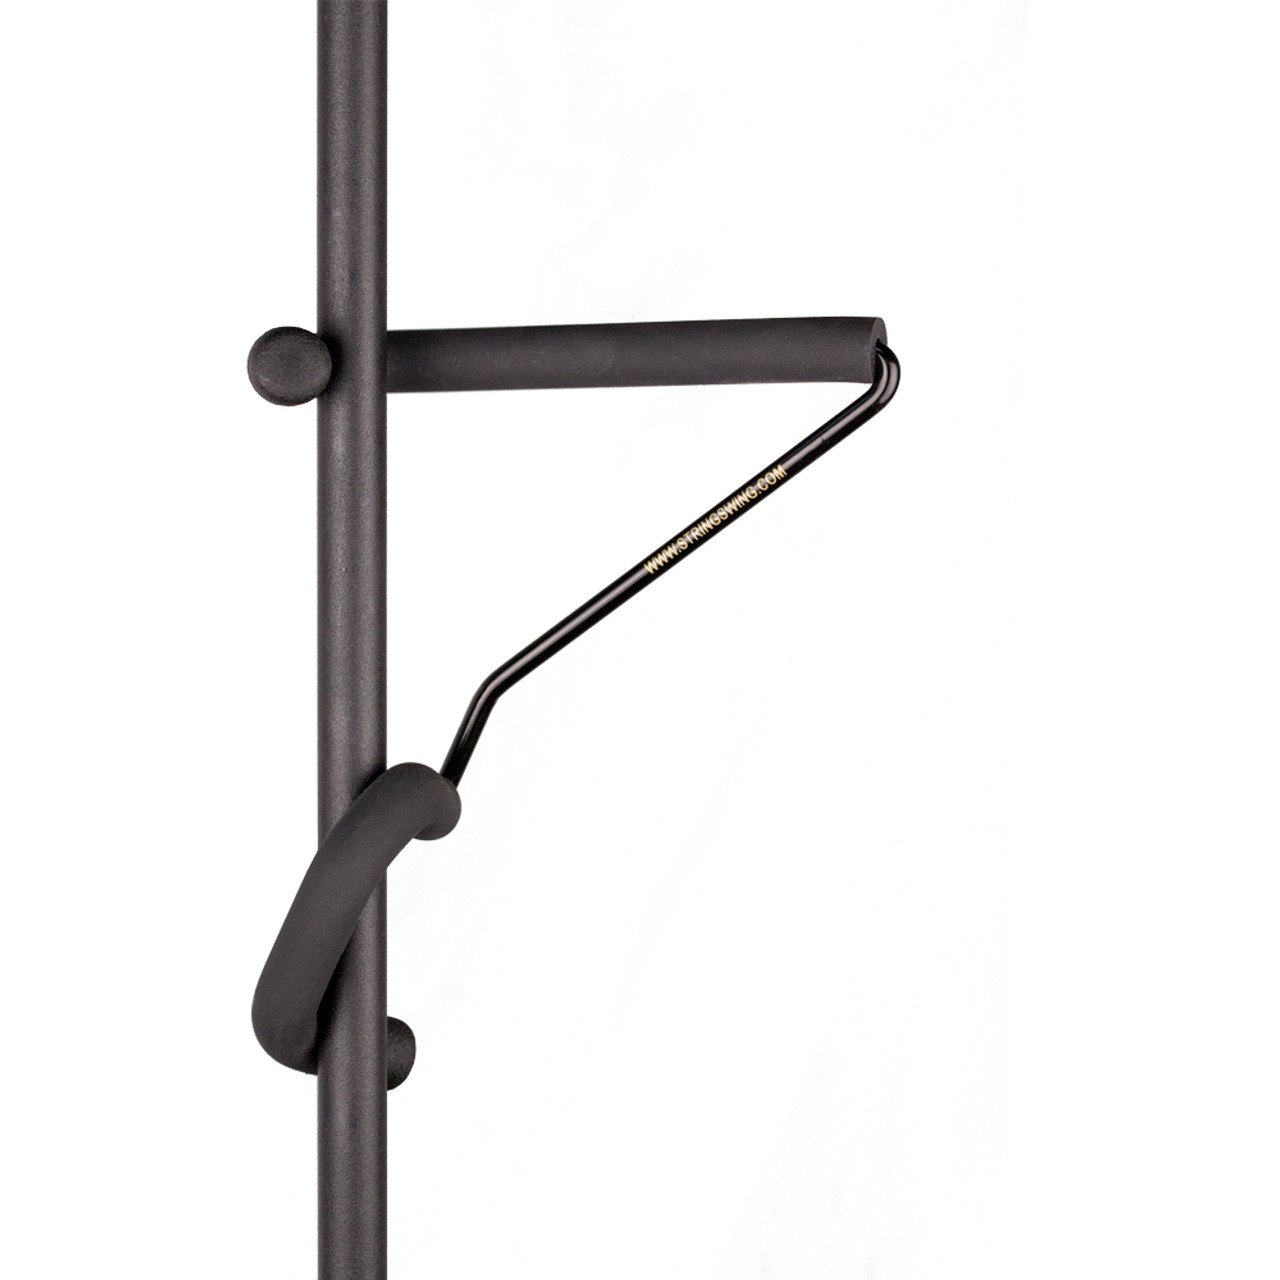 Mic Stand Accessory Holders  msattachments - String Swing